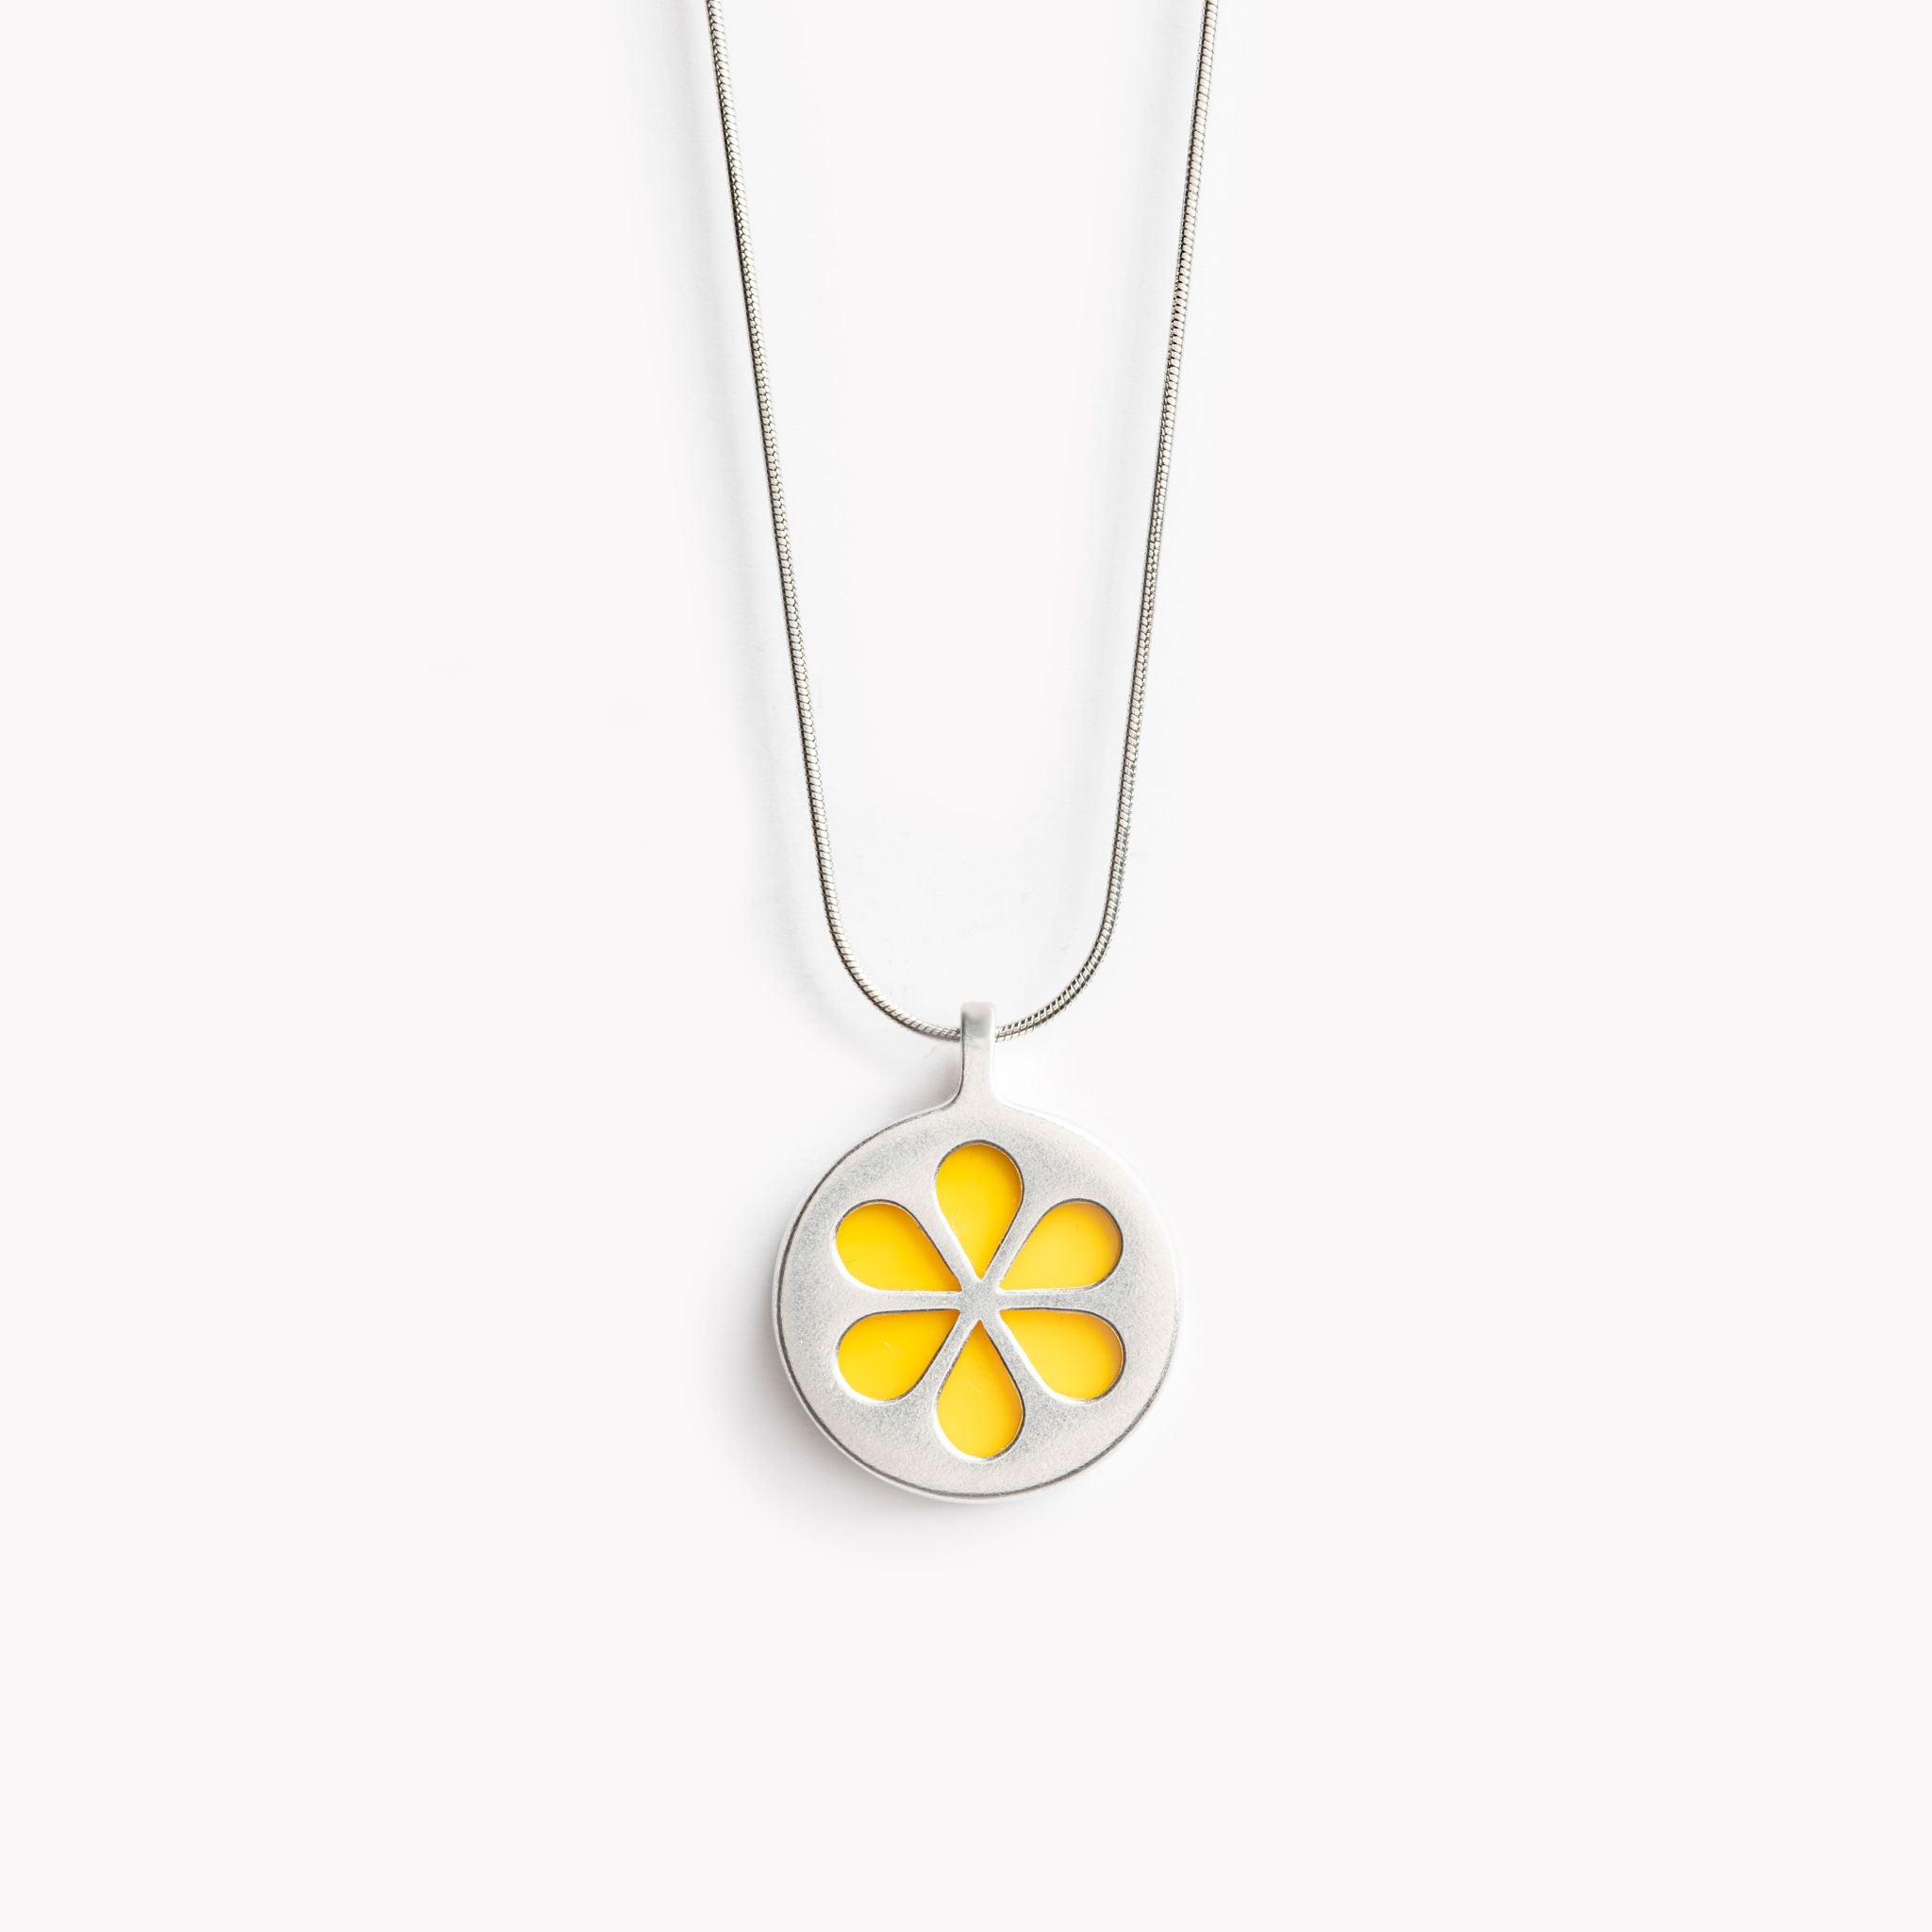 A simple circular pendant necklace with a bright yellow flower petal design.